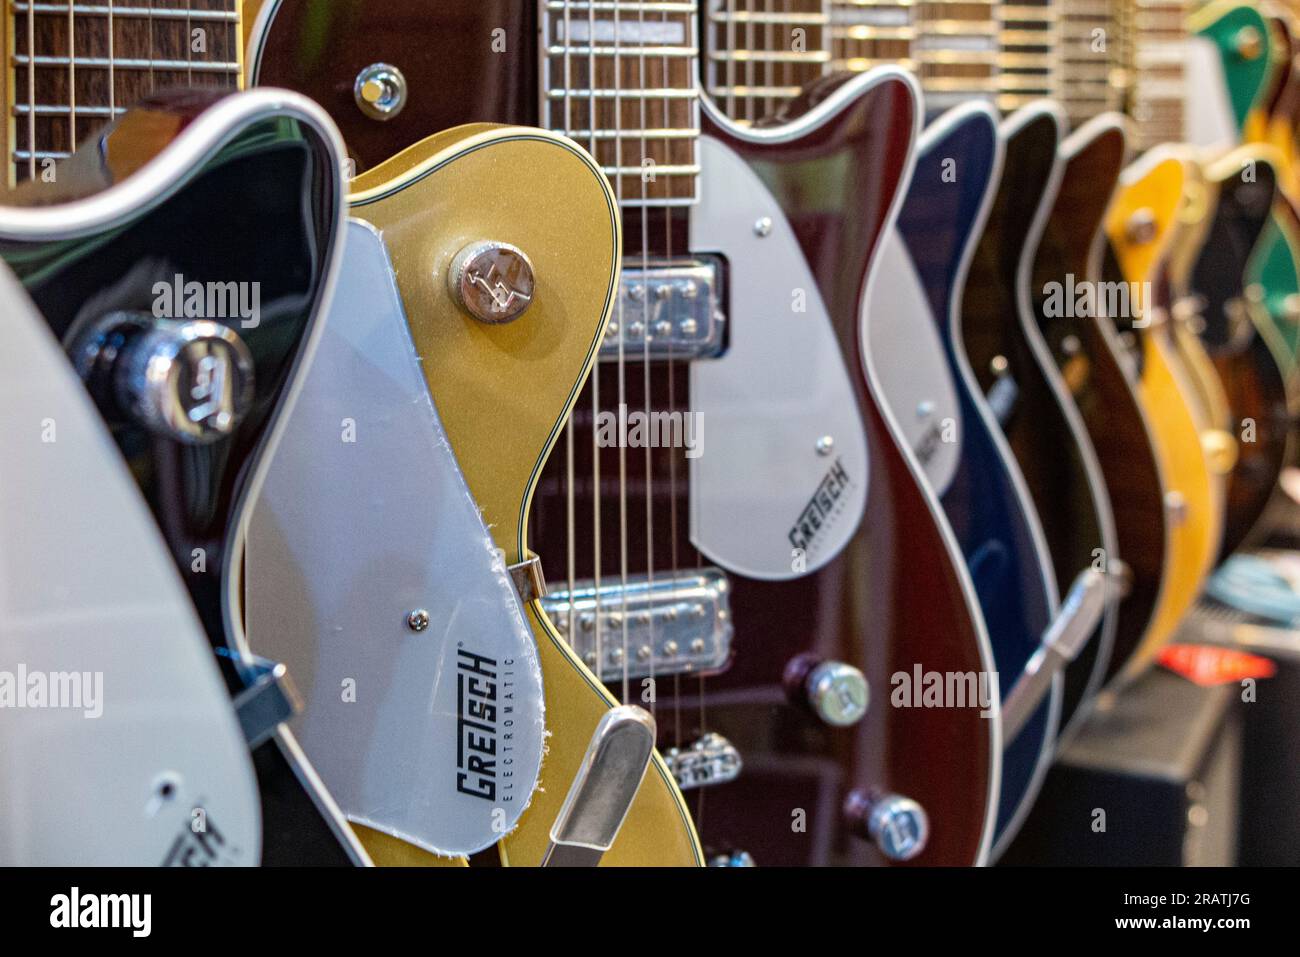 Rows of guitars in a guitar shop Stock Photo